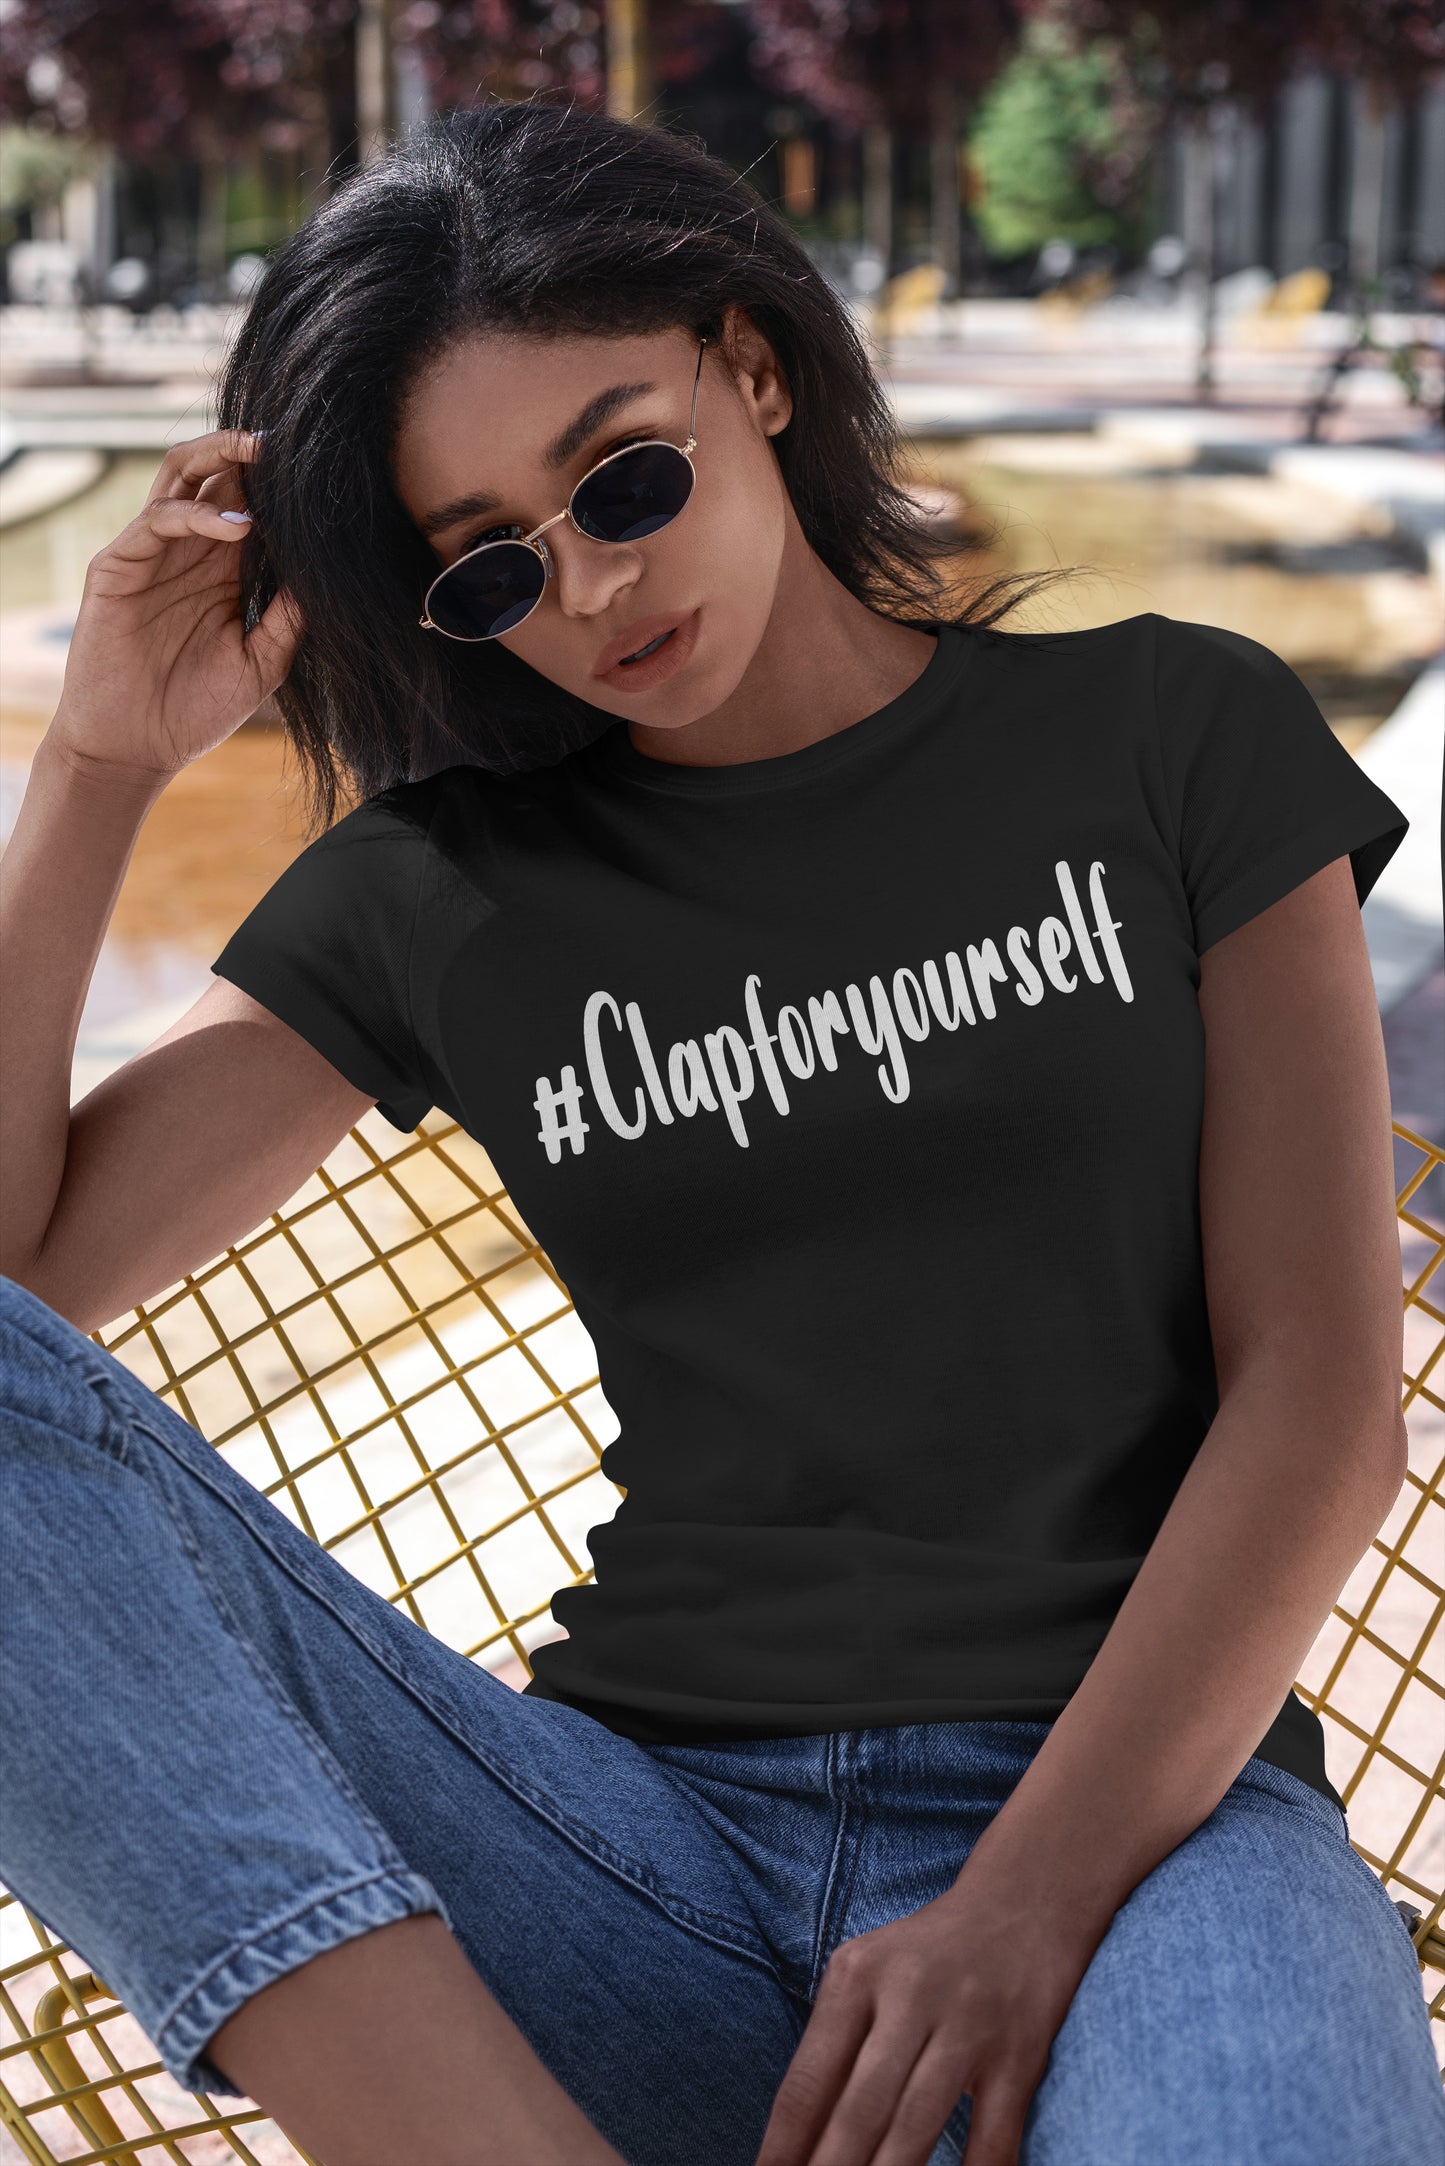 Clap For Yourself T-Shirt